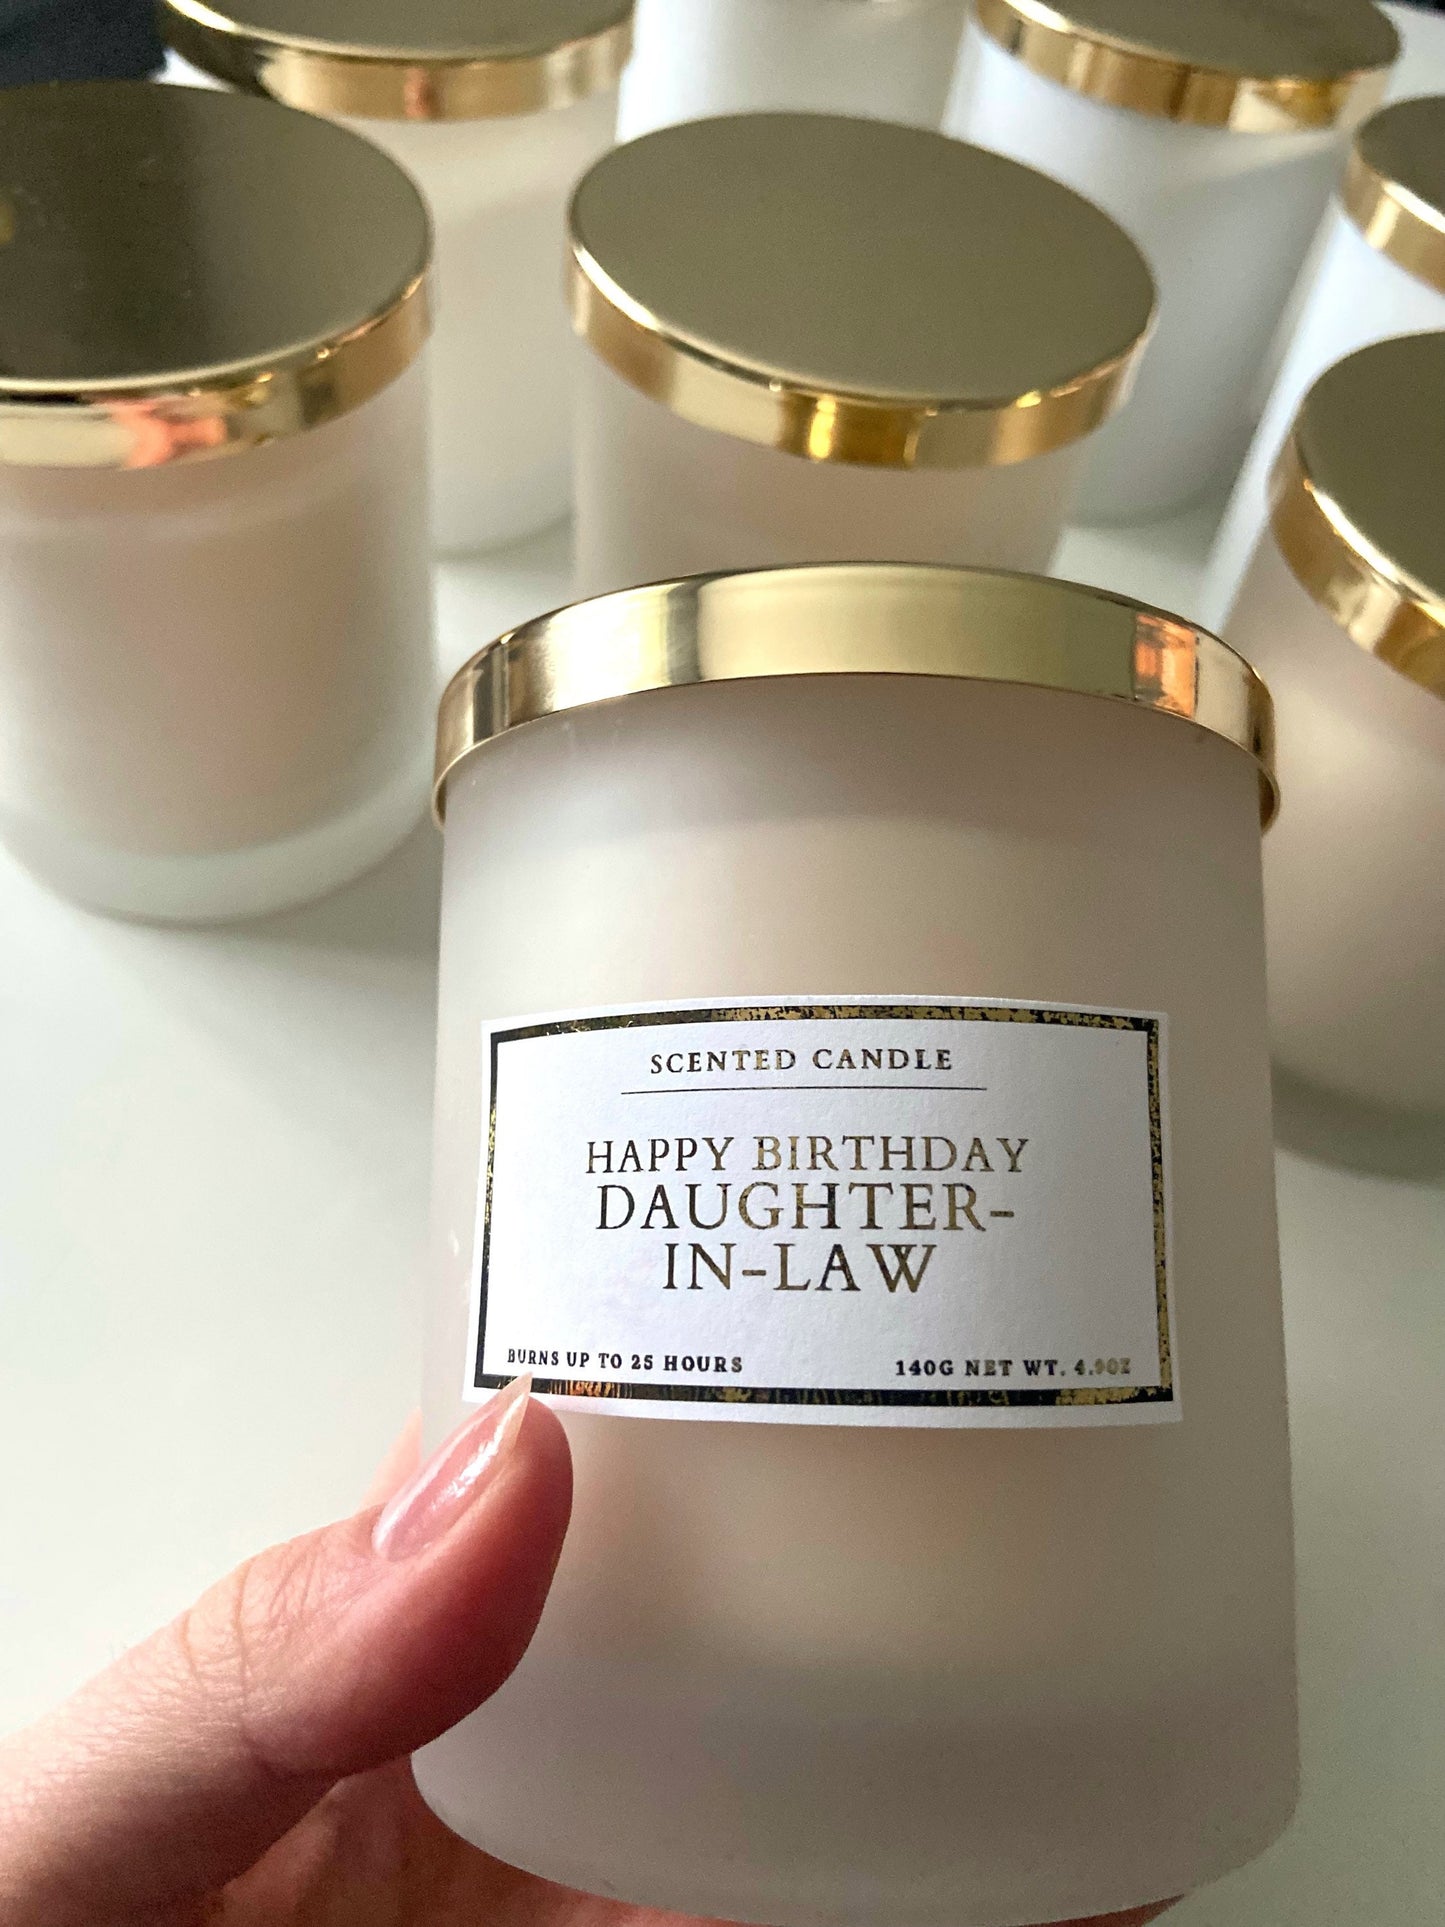 Happy Birthday Daughter-In-Law Candle